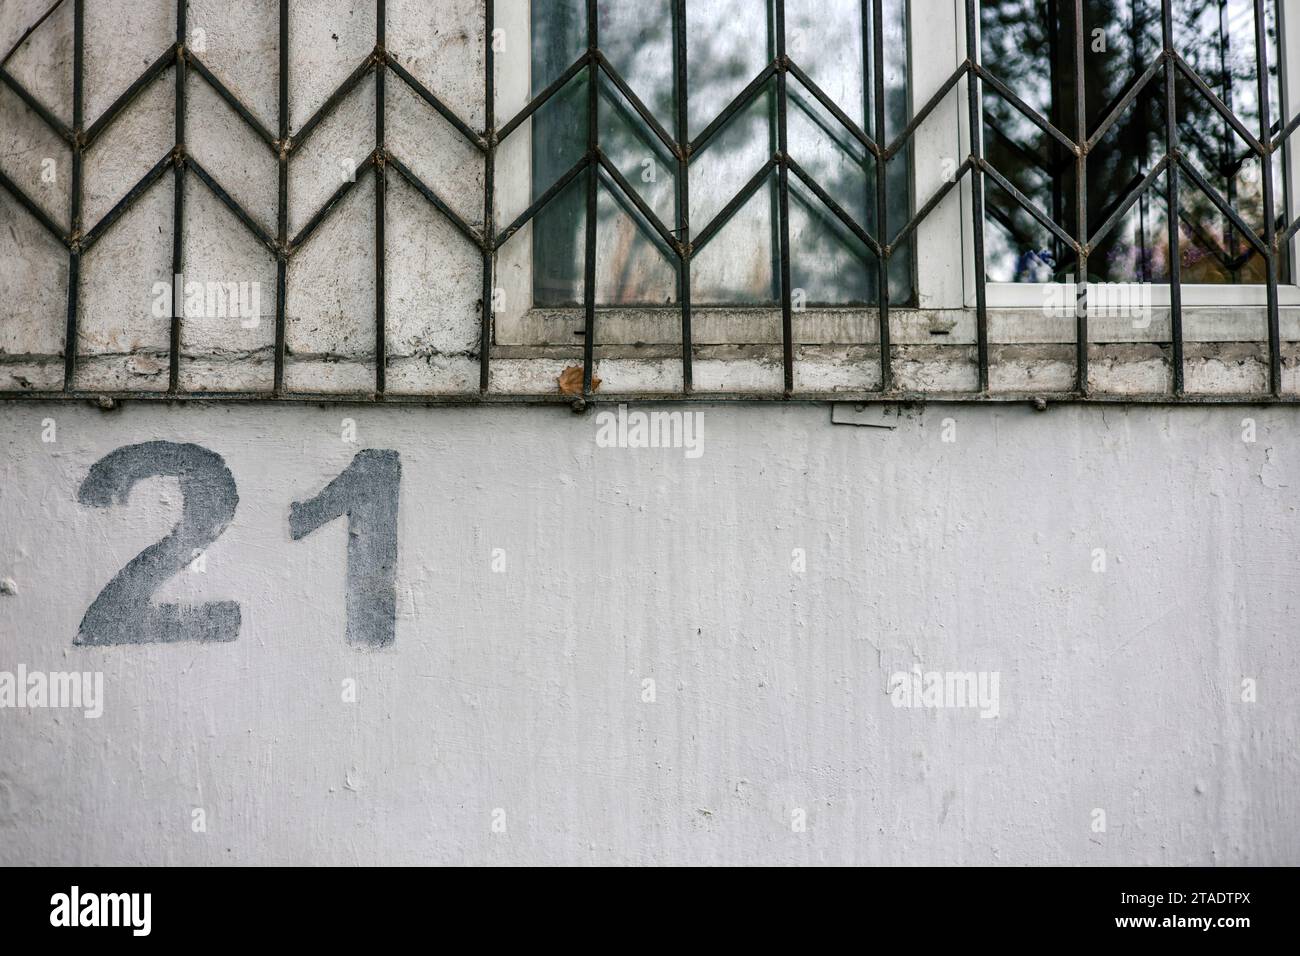 House numbering. The number 21 twenty one is painted using a stencil on a gray wall below a window with bars Stock Photo